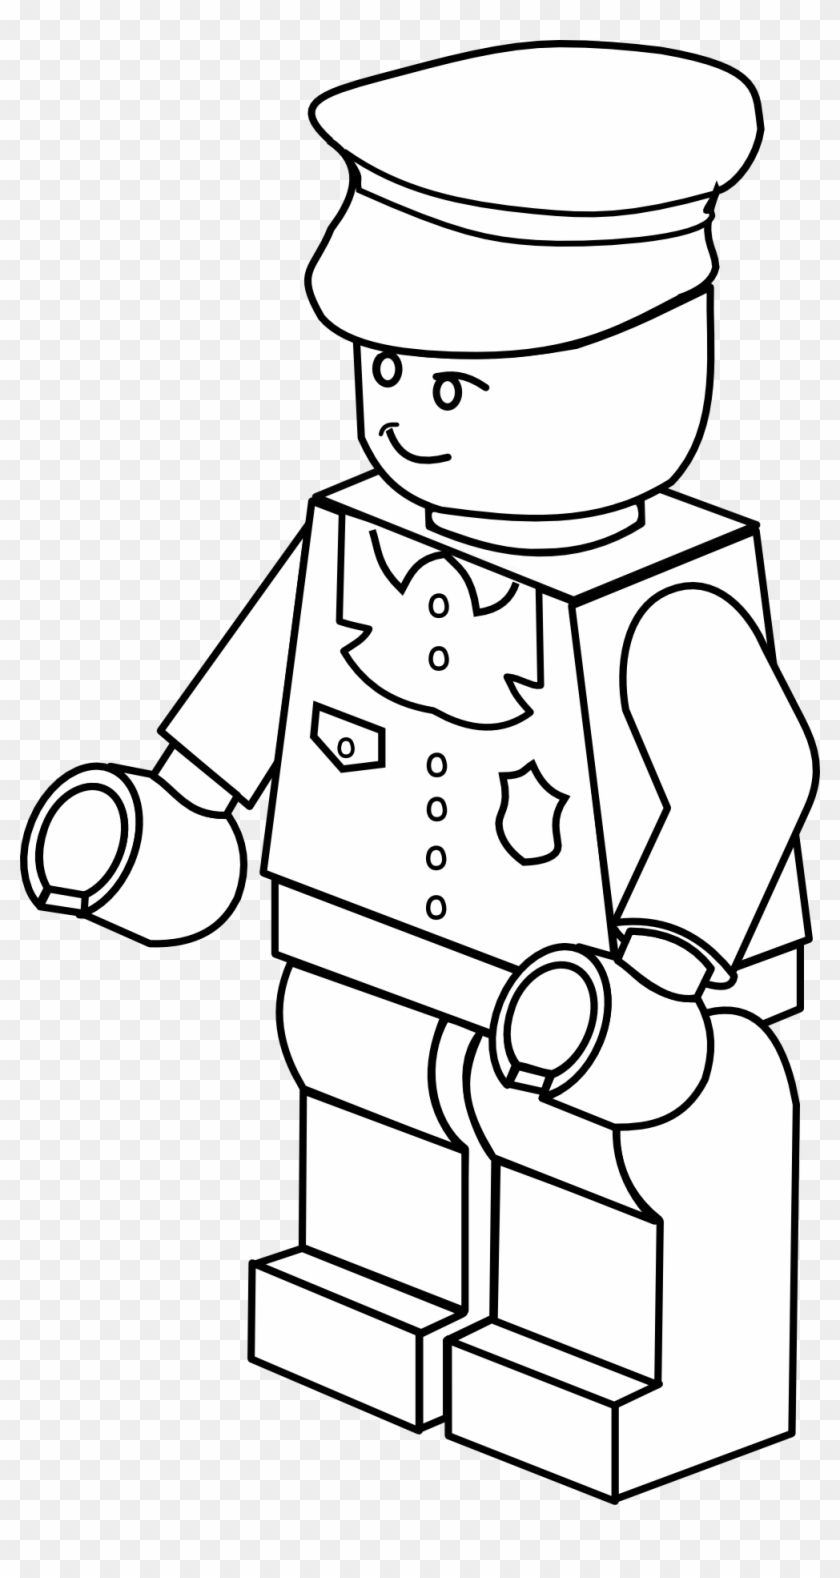 Colouring In Sheets Lego Man Coloring Police Officer - Lego Clipart #991730